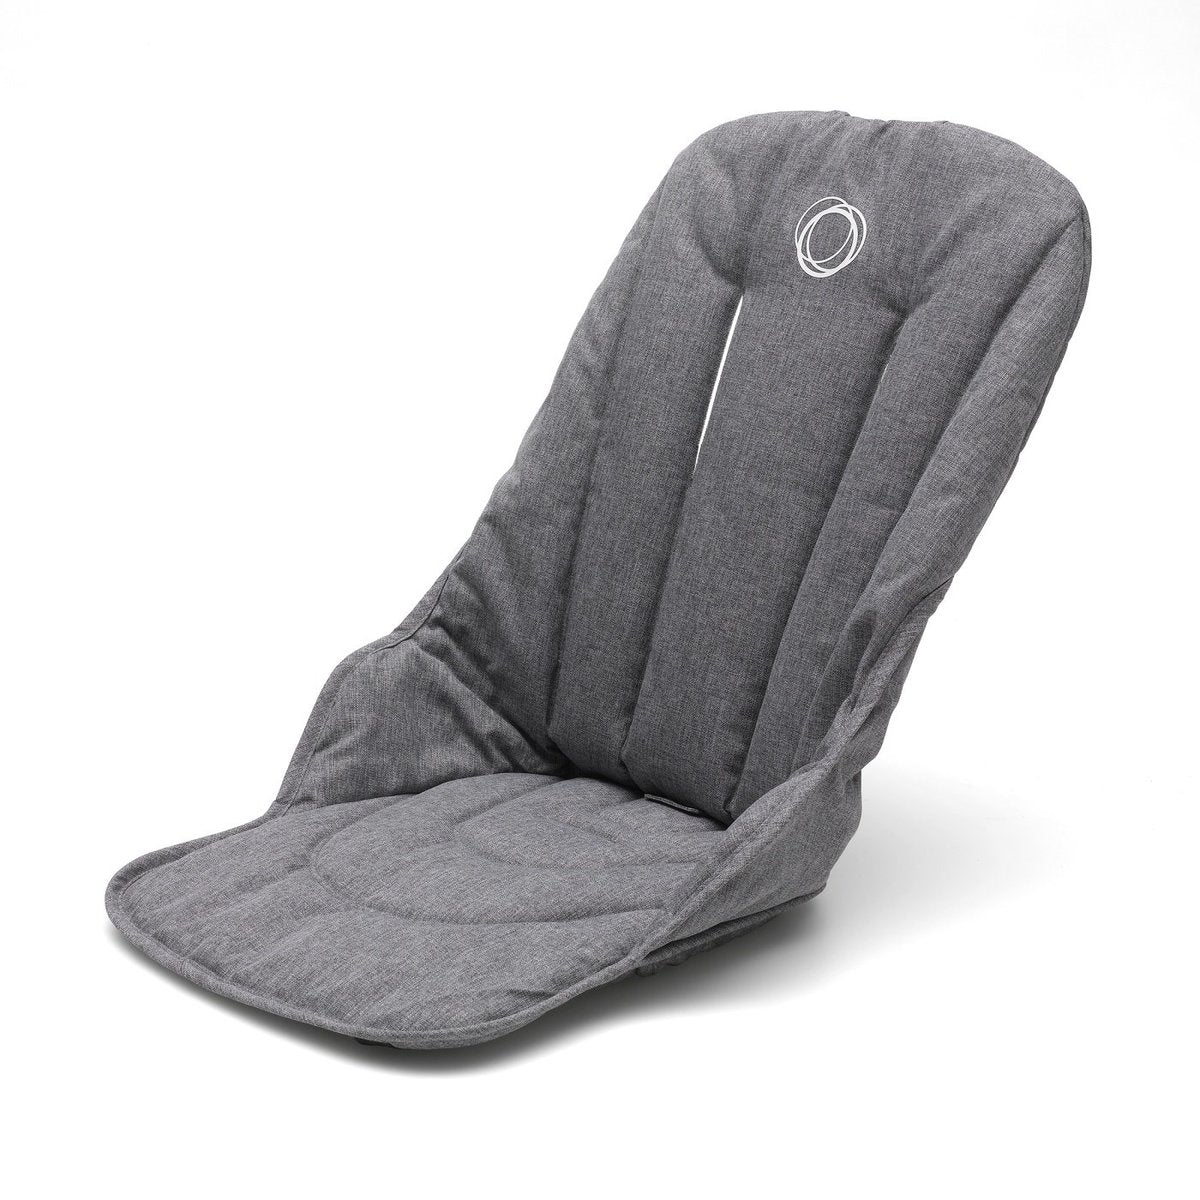 Bugaboo Bee3 Seat Cover